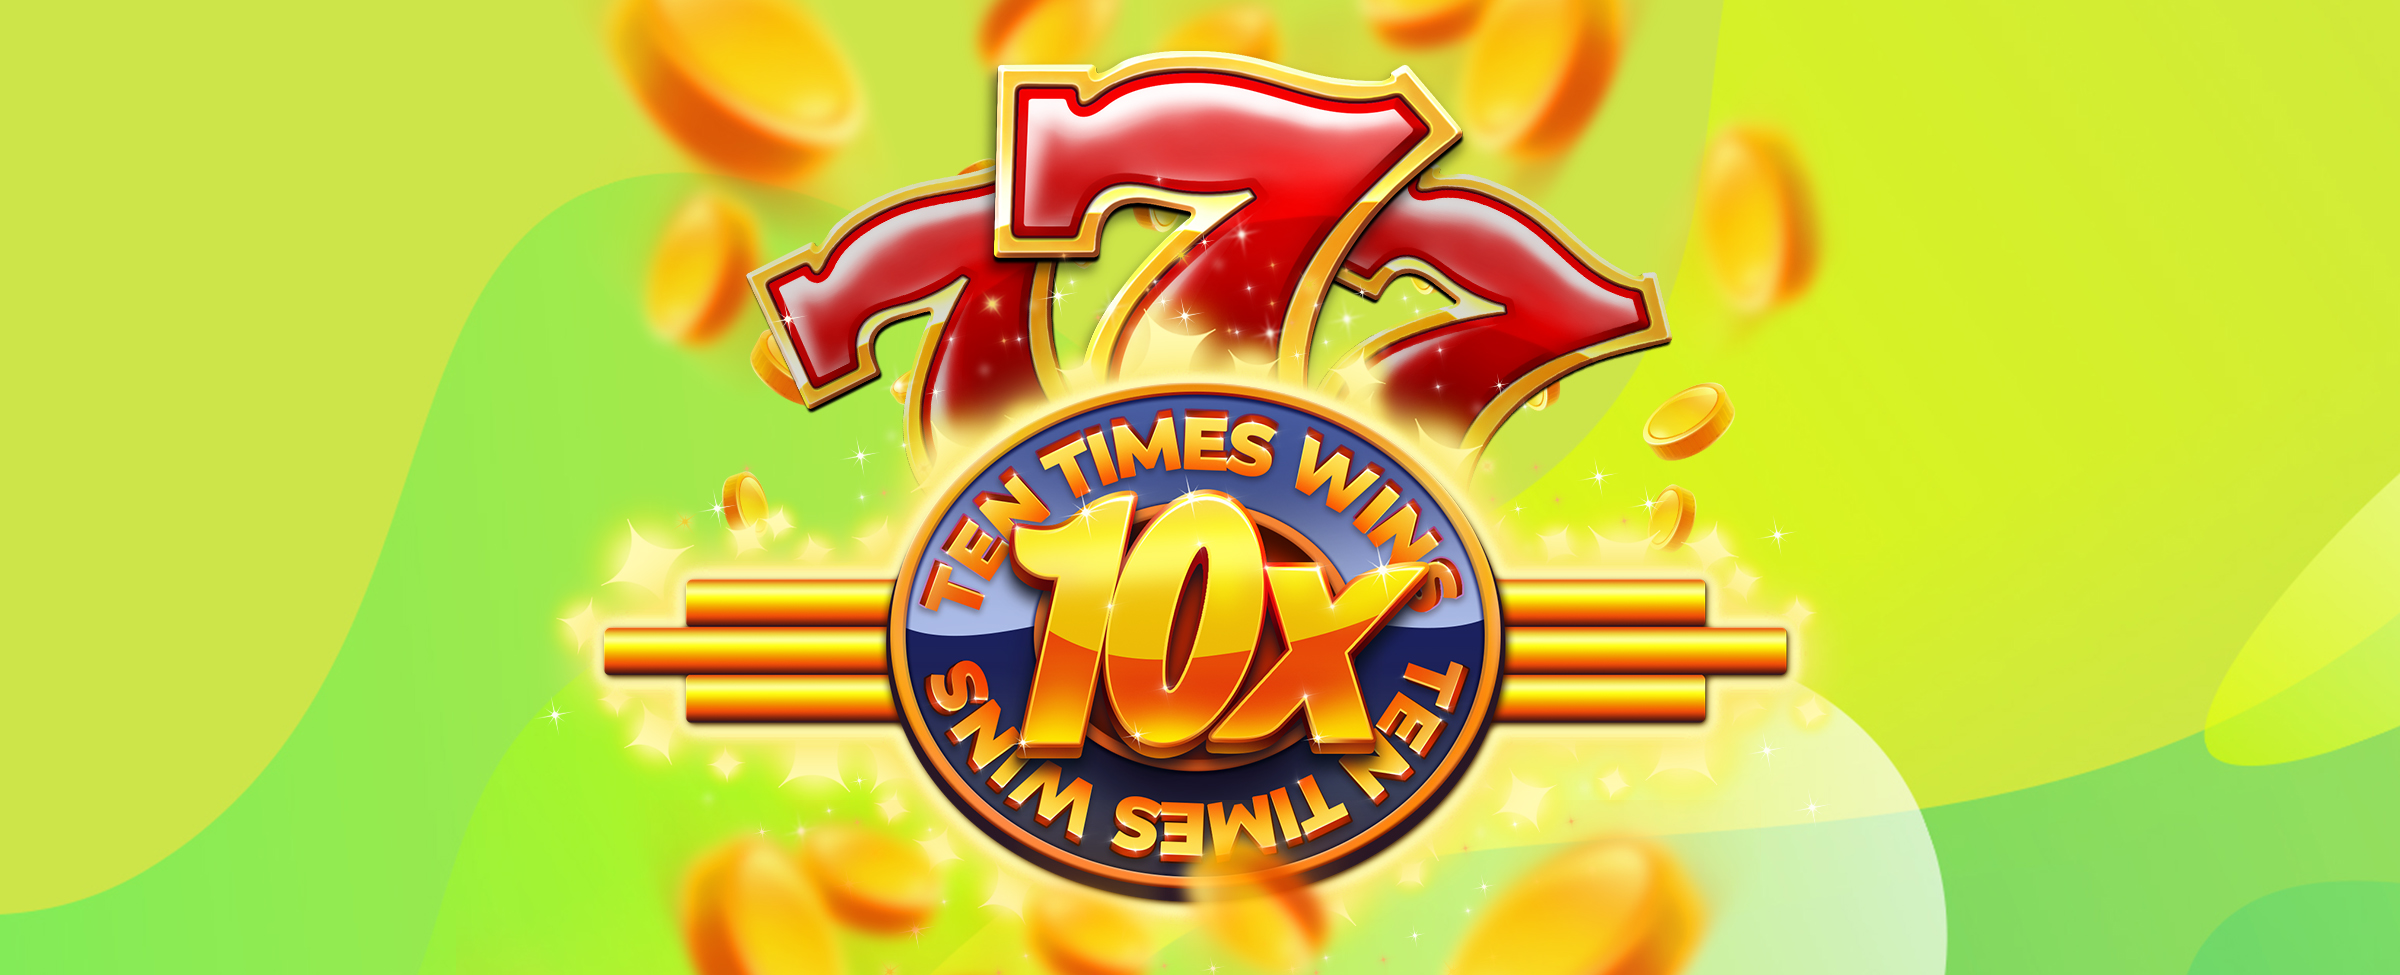 Set against a lime green abstract background is the logo for the SlotsLV slots game, Ten Times Wins. The logo features 3D-animated number sevens in red with gold edges; a large “10x” in the middle; and is surrounded by the words “ten times wins” both above and below.